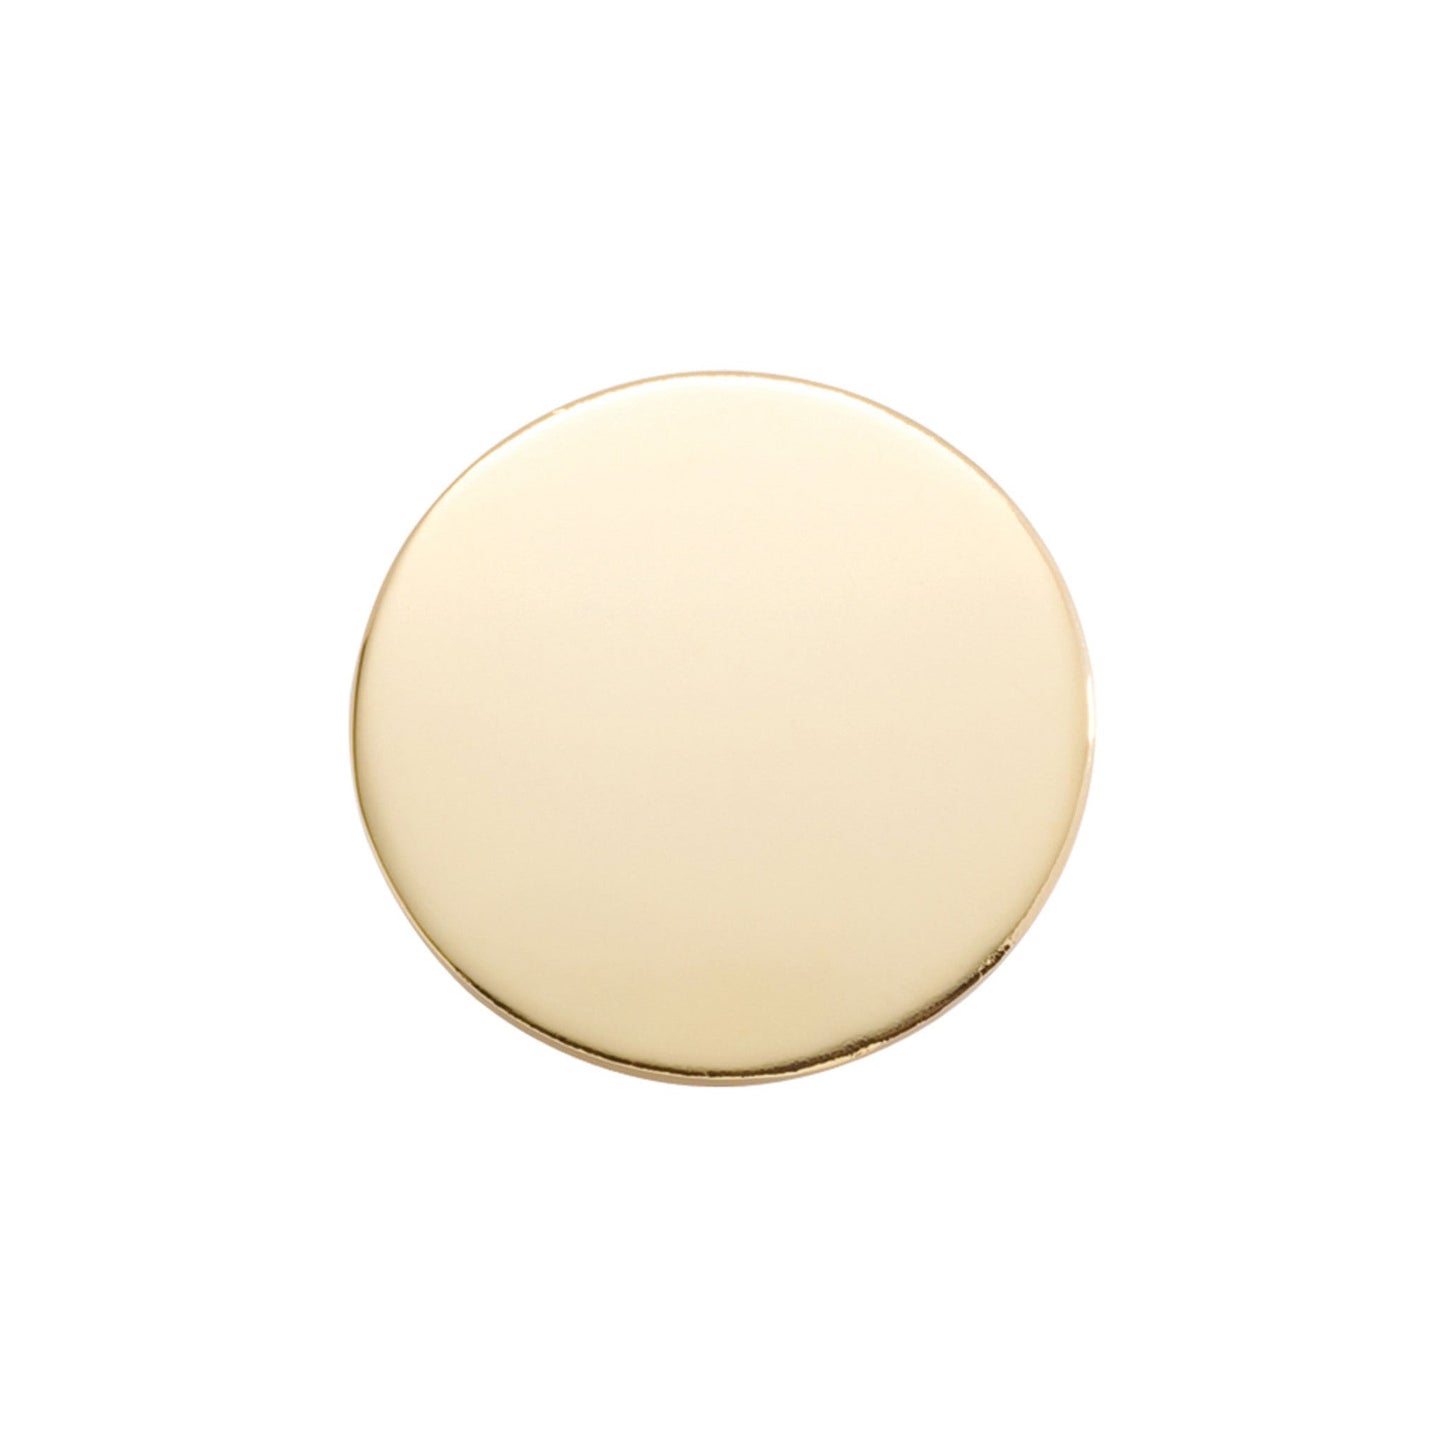 A polished round pin displayed on a neutral white background.